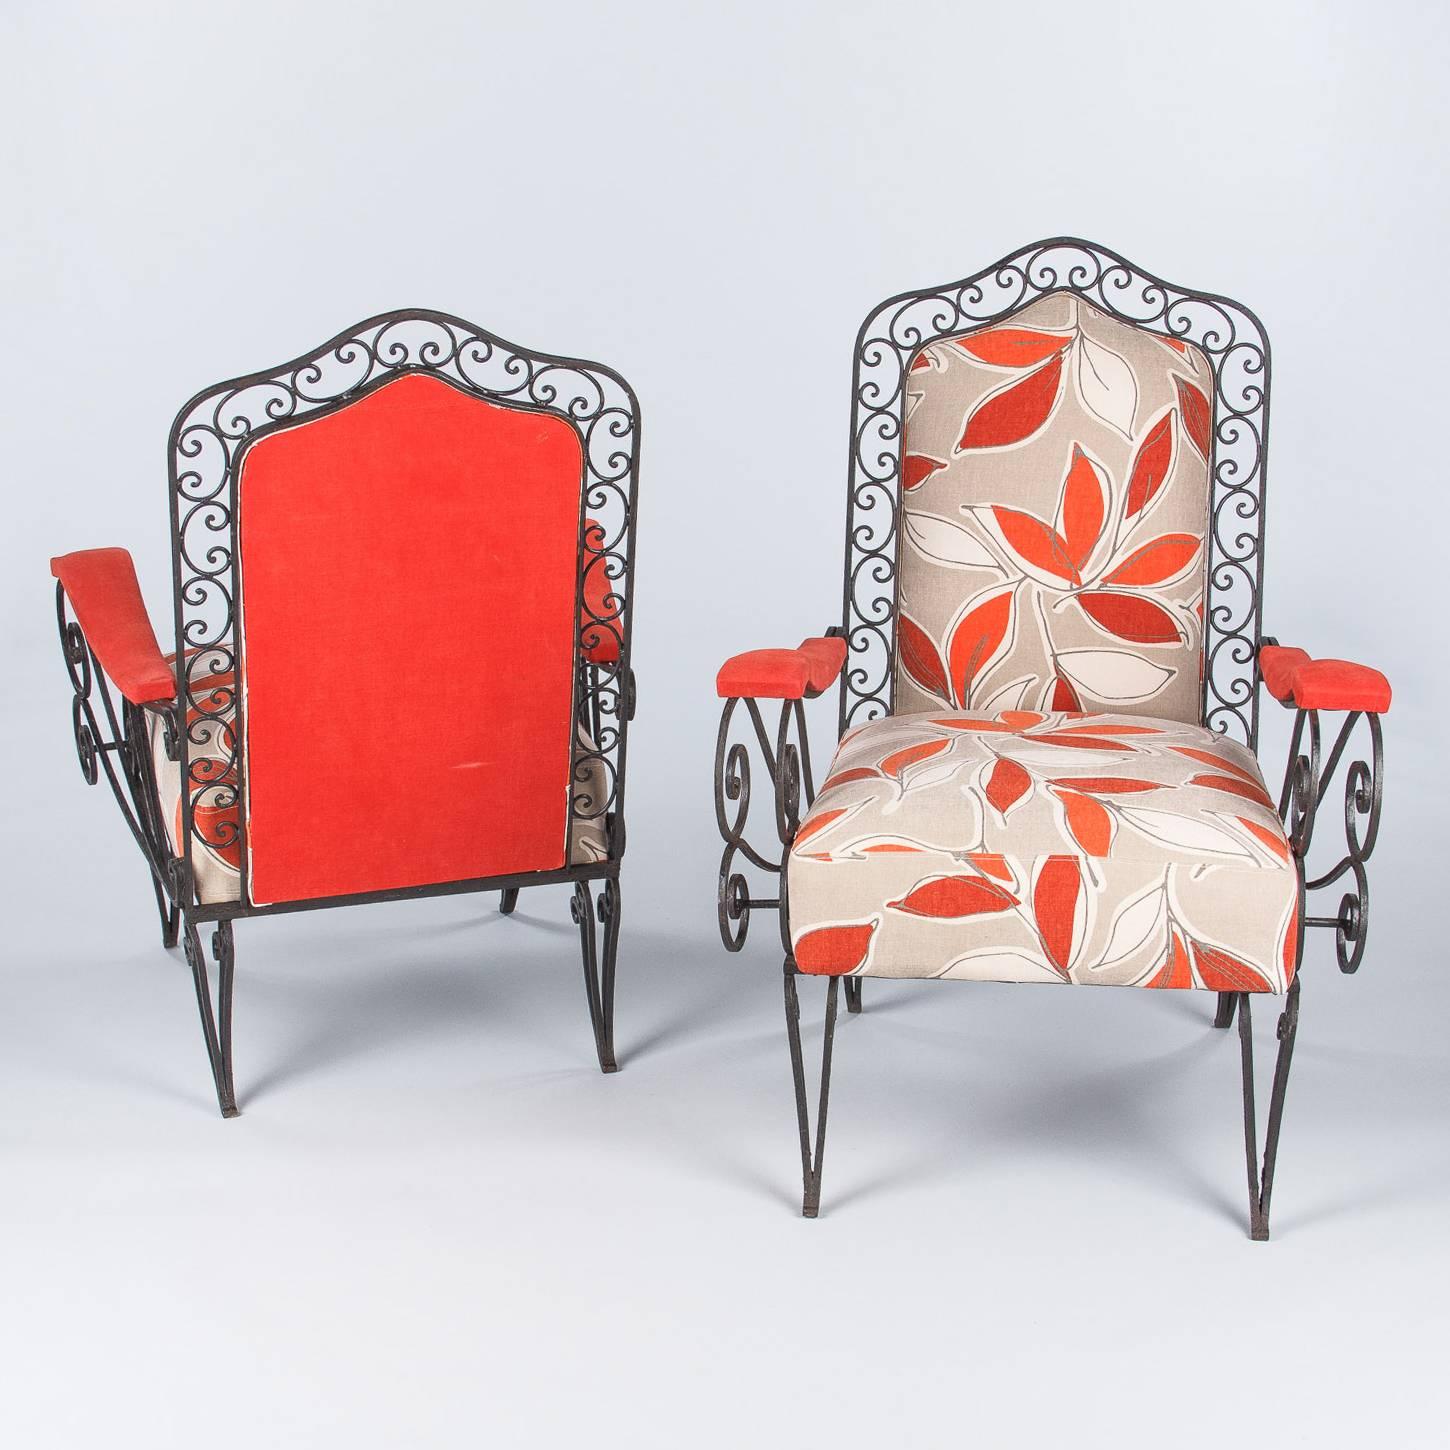 Mid-20th Century Pair of French Wrought Iron Armchairs with Red Leaf Upholstery, 1940s